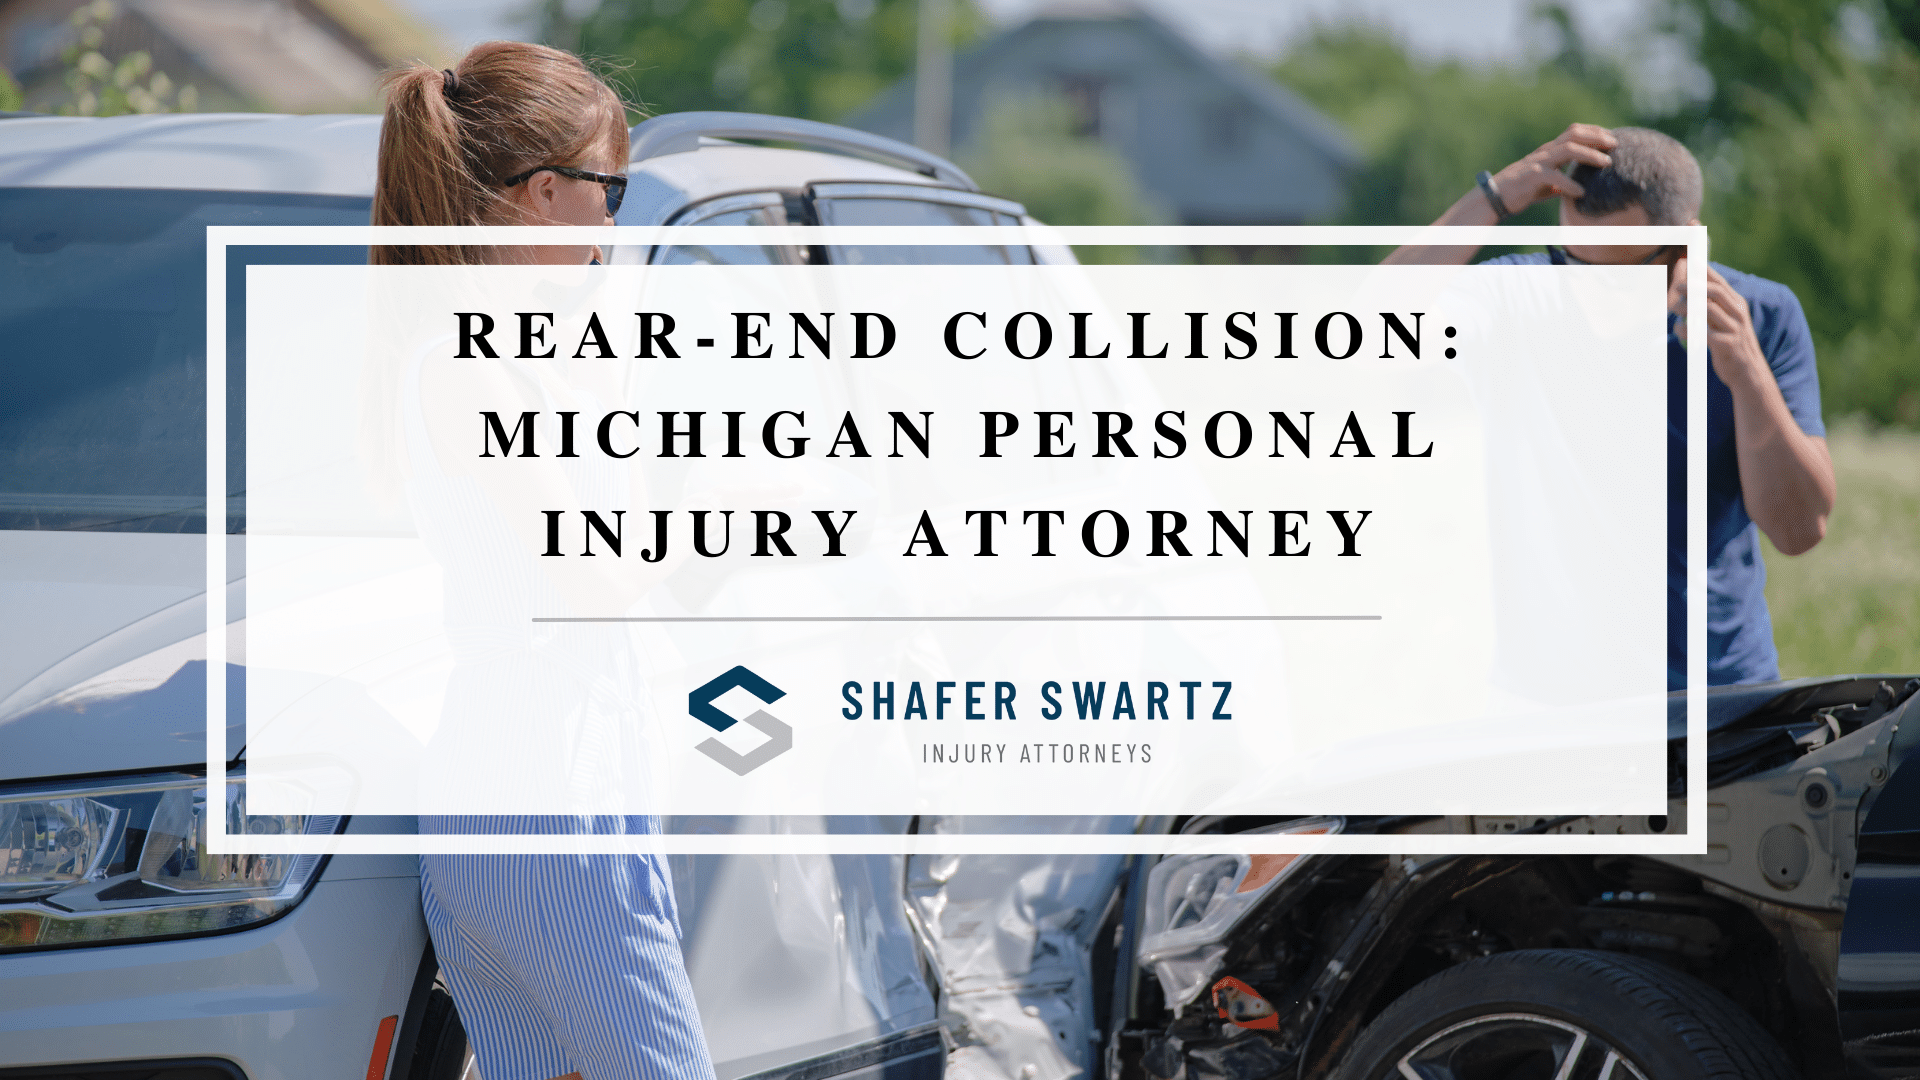 Featured image of rear-end collision: Michigan personal atttorney